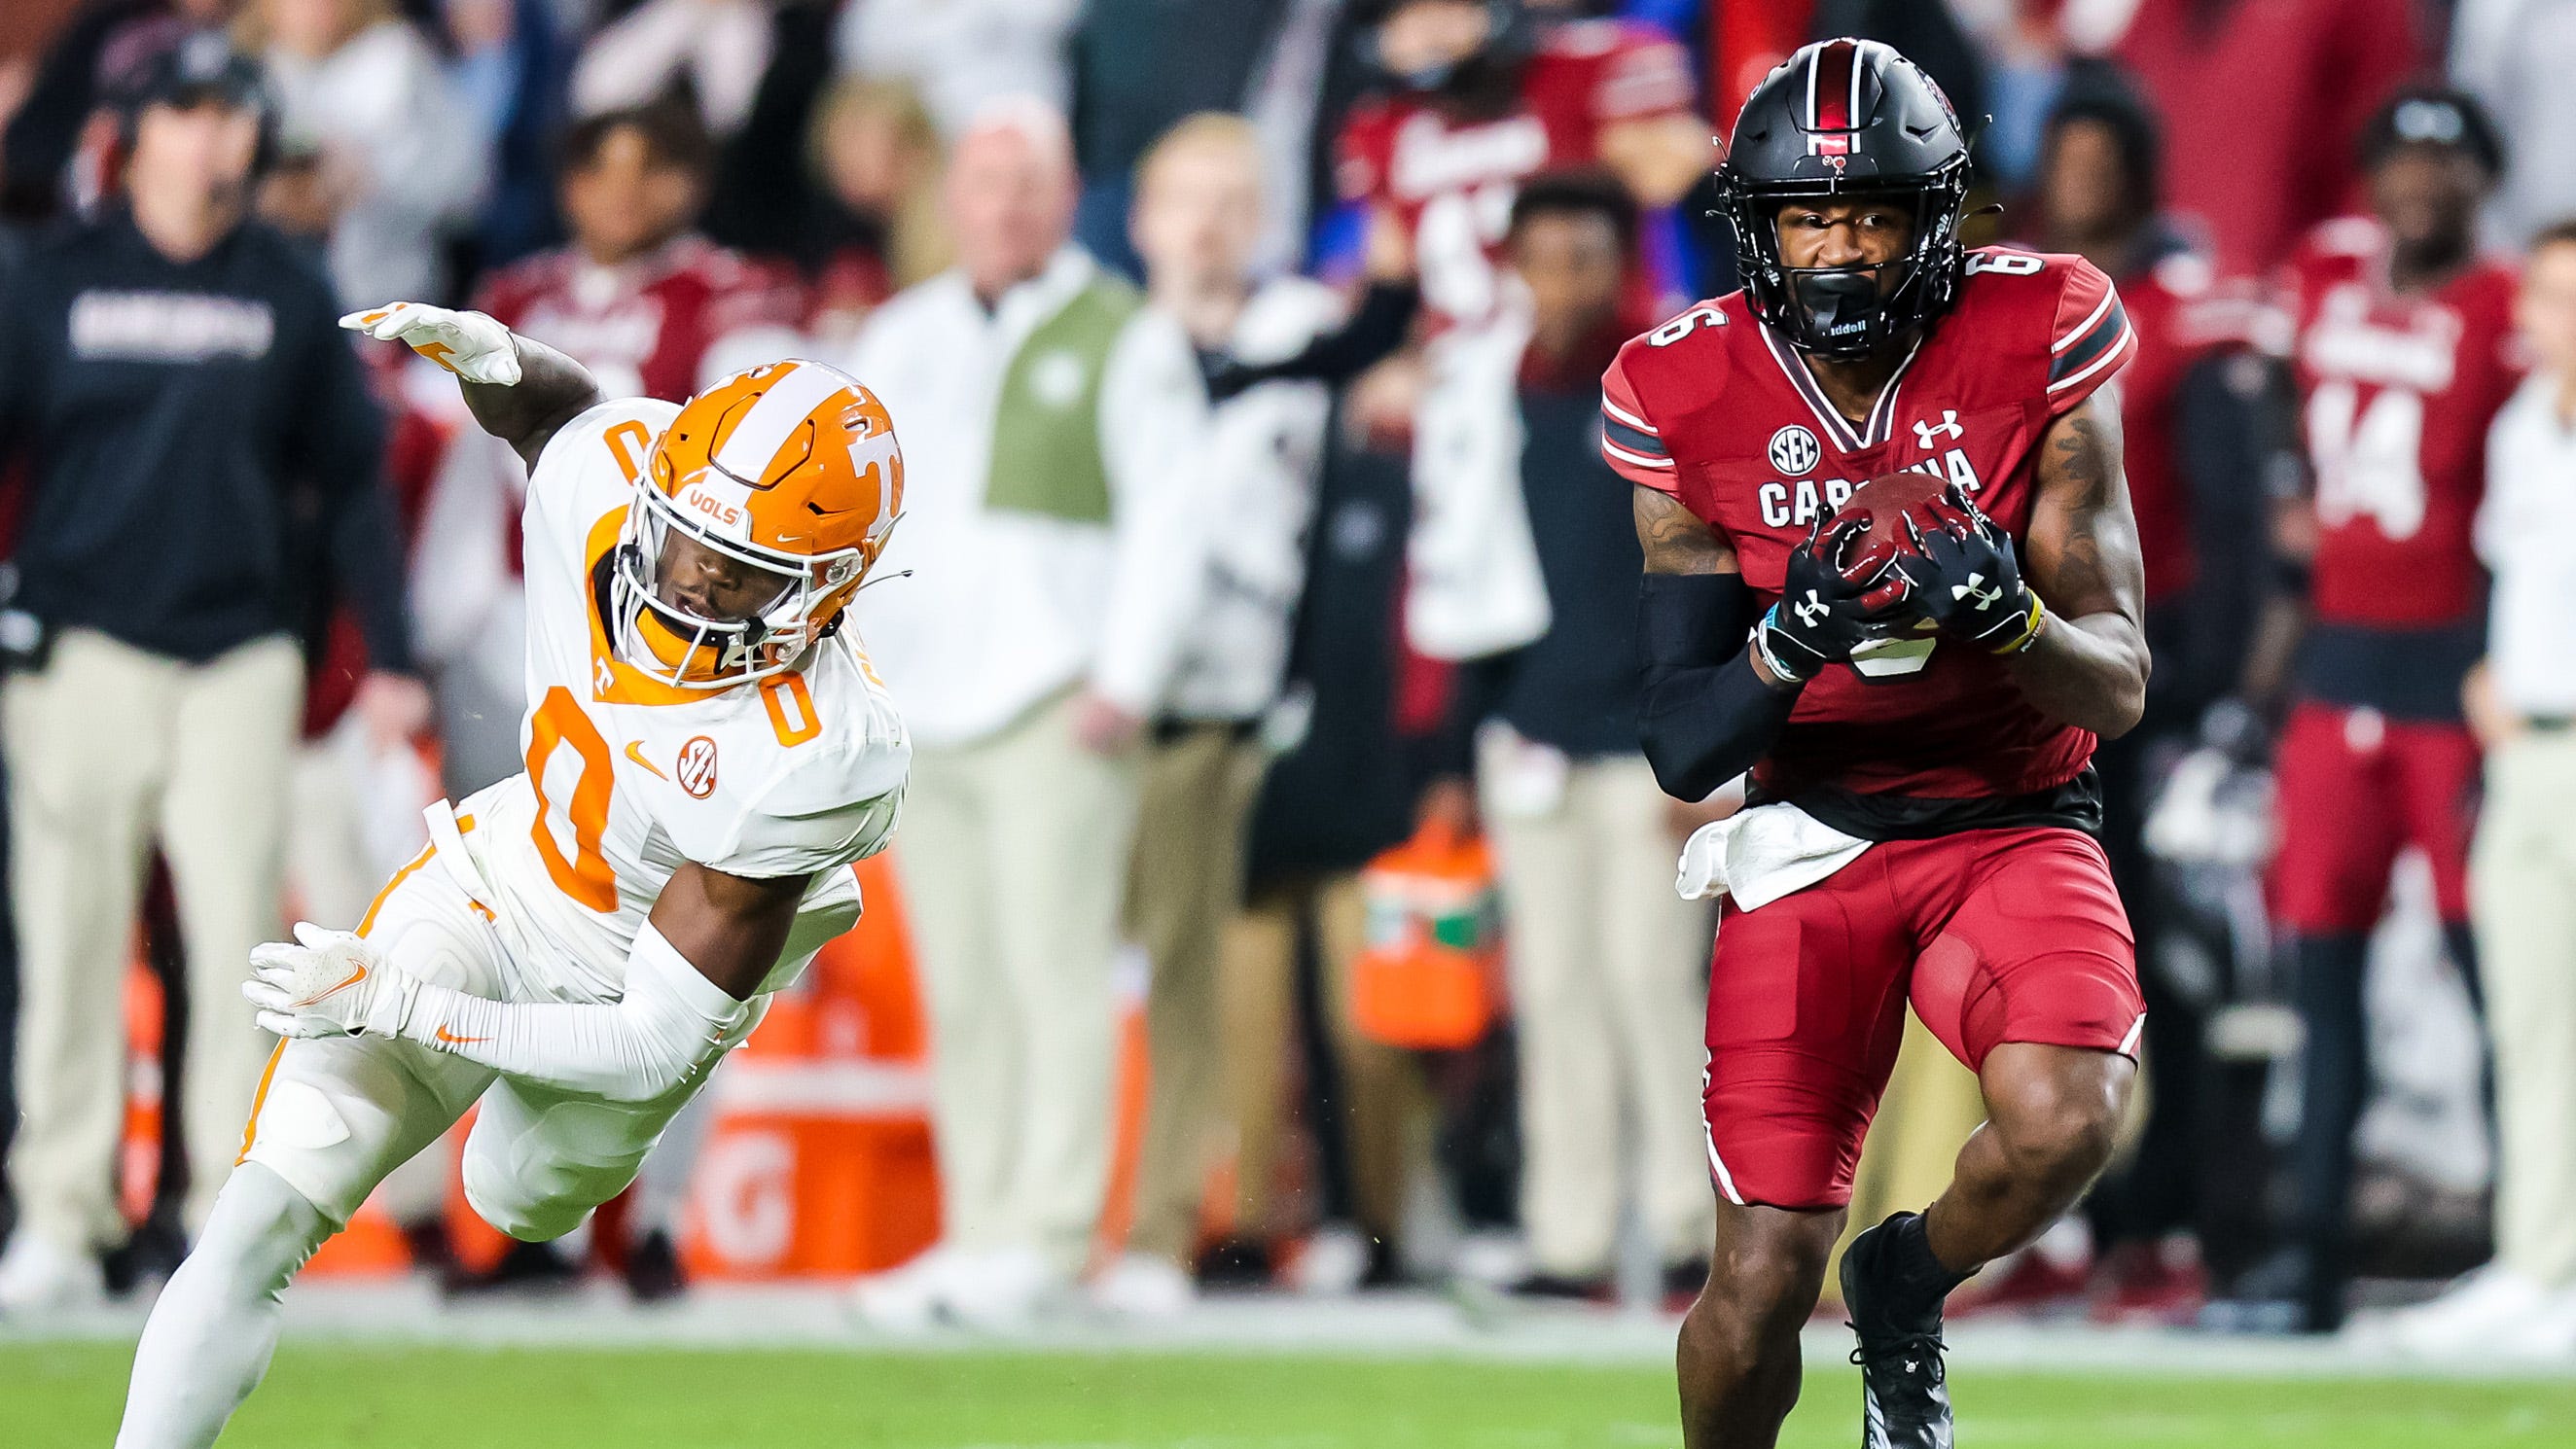 Tennessee football CFP playoff hopes buried in loss to South Carolina